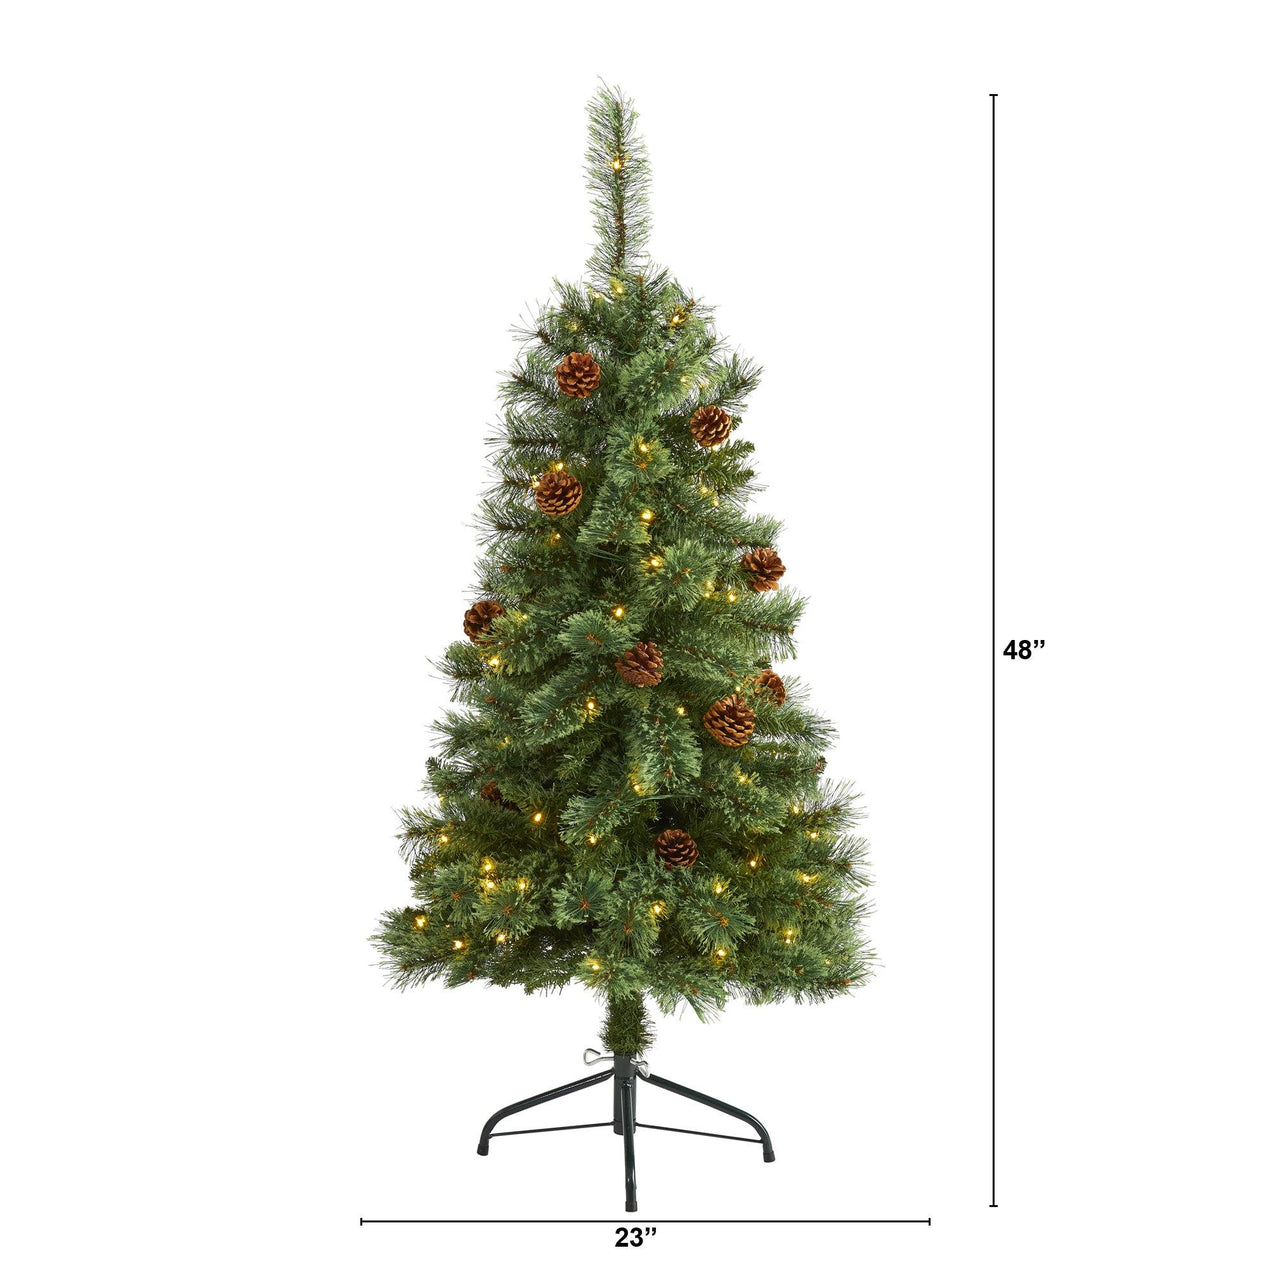 4’ White Mountain Pine Artificial Christmas Tree with 100 Clear LED Lights and Pine Cones - The Fox Decor